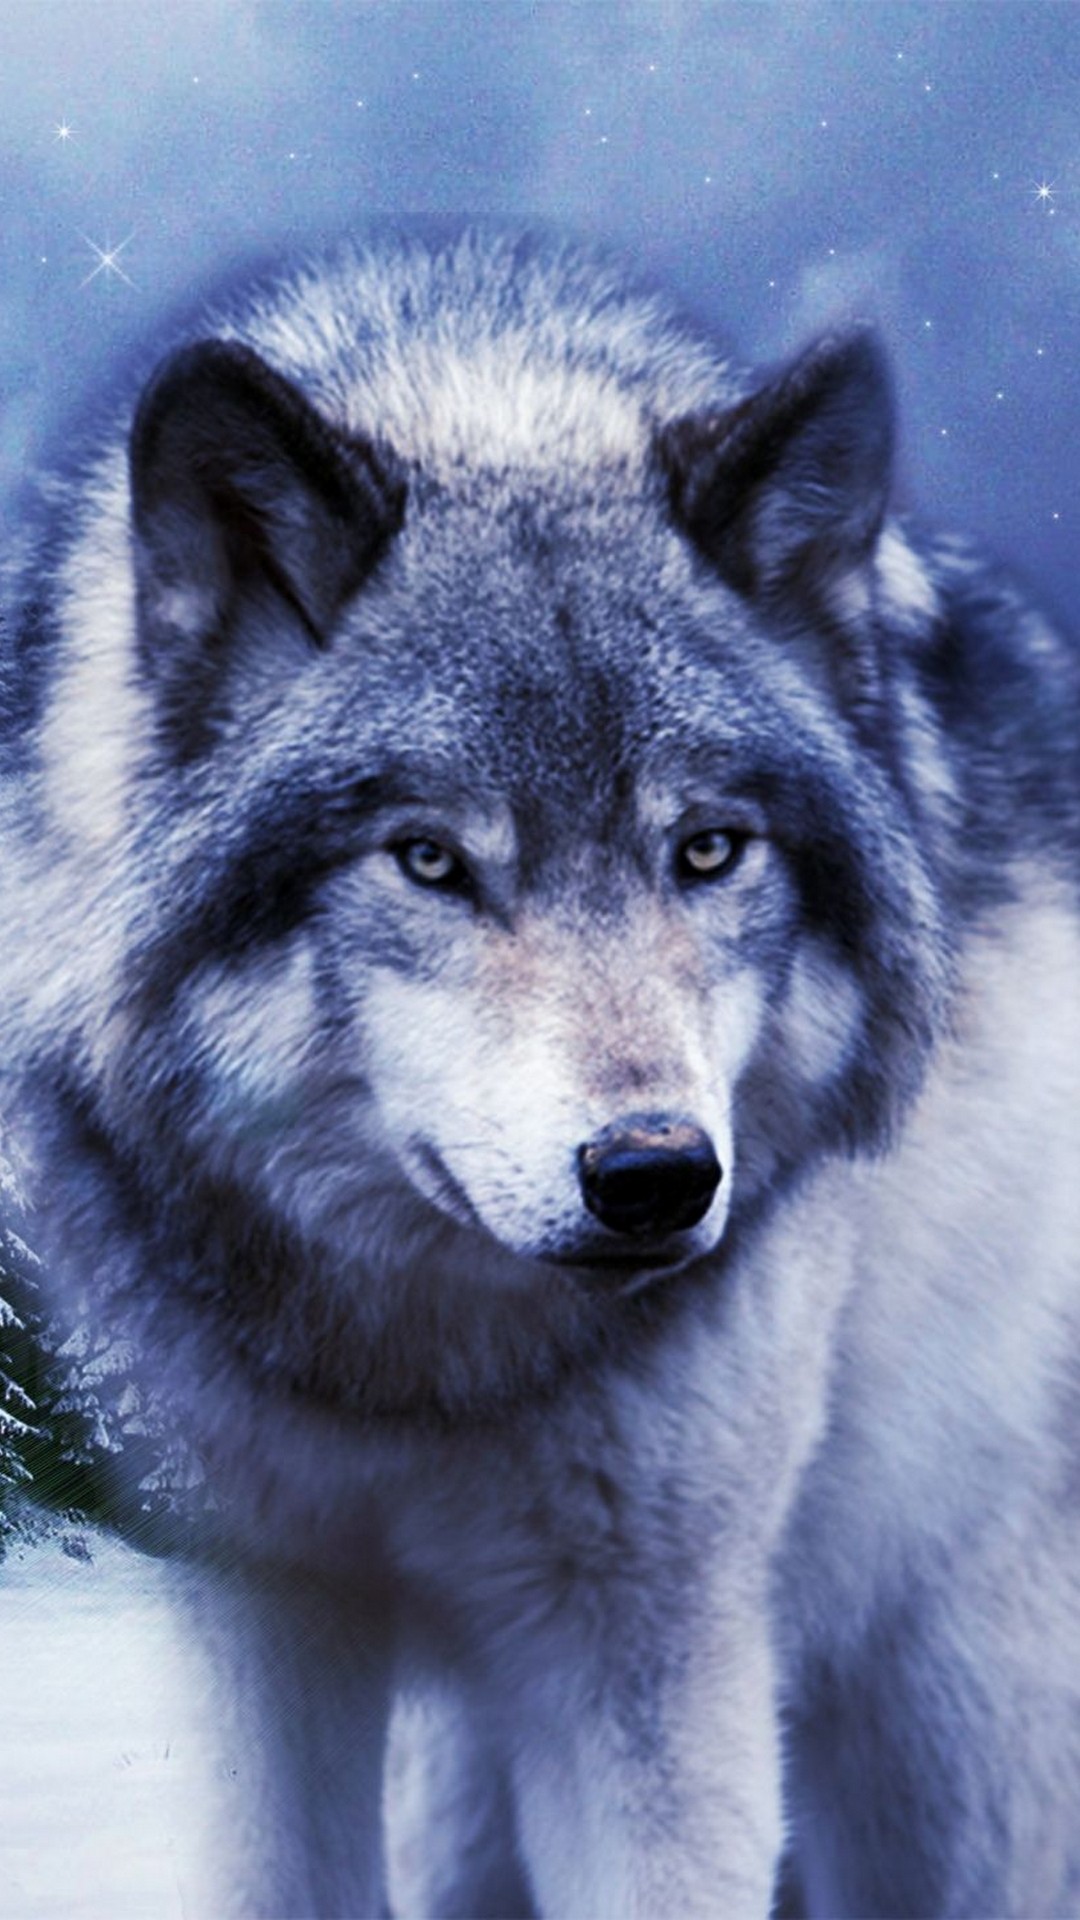 Cool Wolf iPhone Wallpaper in HD with high-resolution 1080x1920 pixel. You can set as wallpaper for Apple iPhone X, XS Max, XR, 8, 7, 6, SE, iPad. Enjoy and share your favorite HD wallpapers and background images